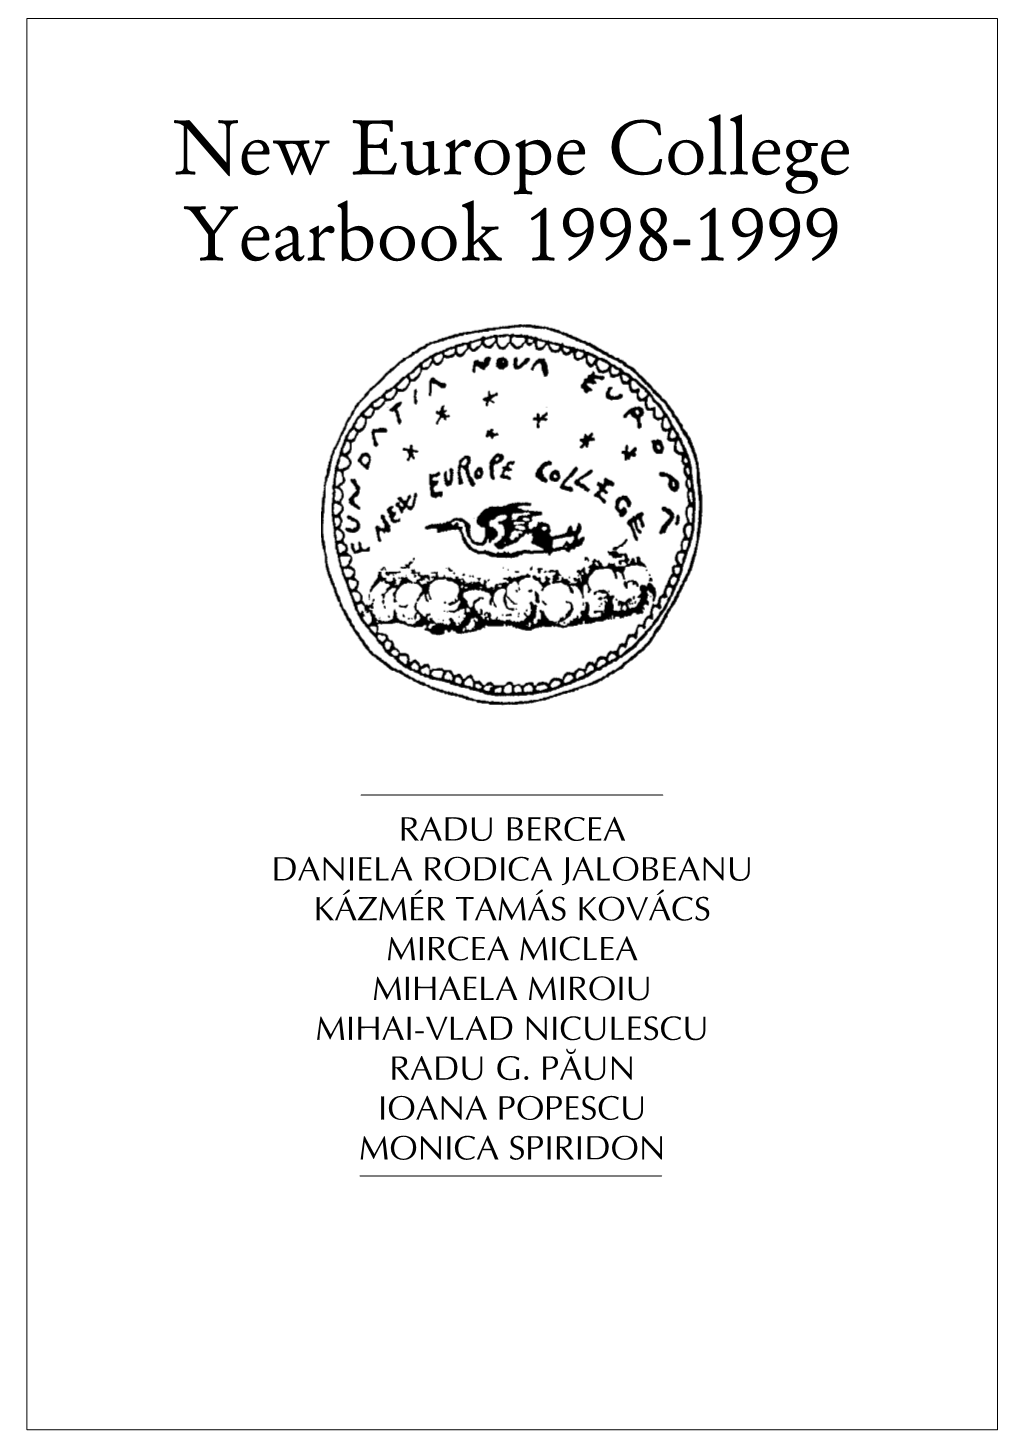 New Europe College Yearbook 1998-1999